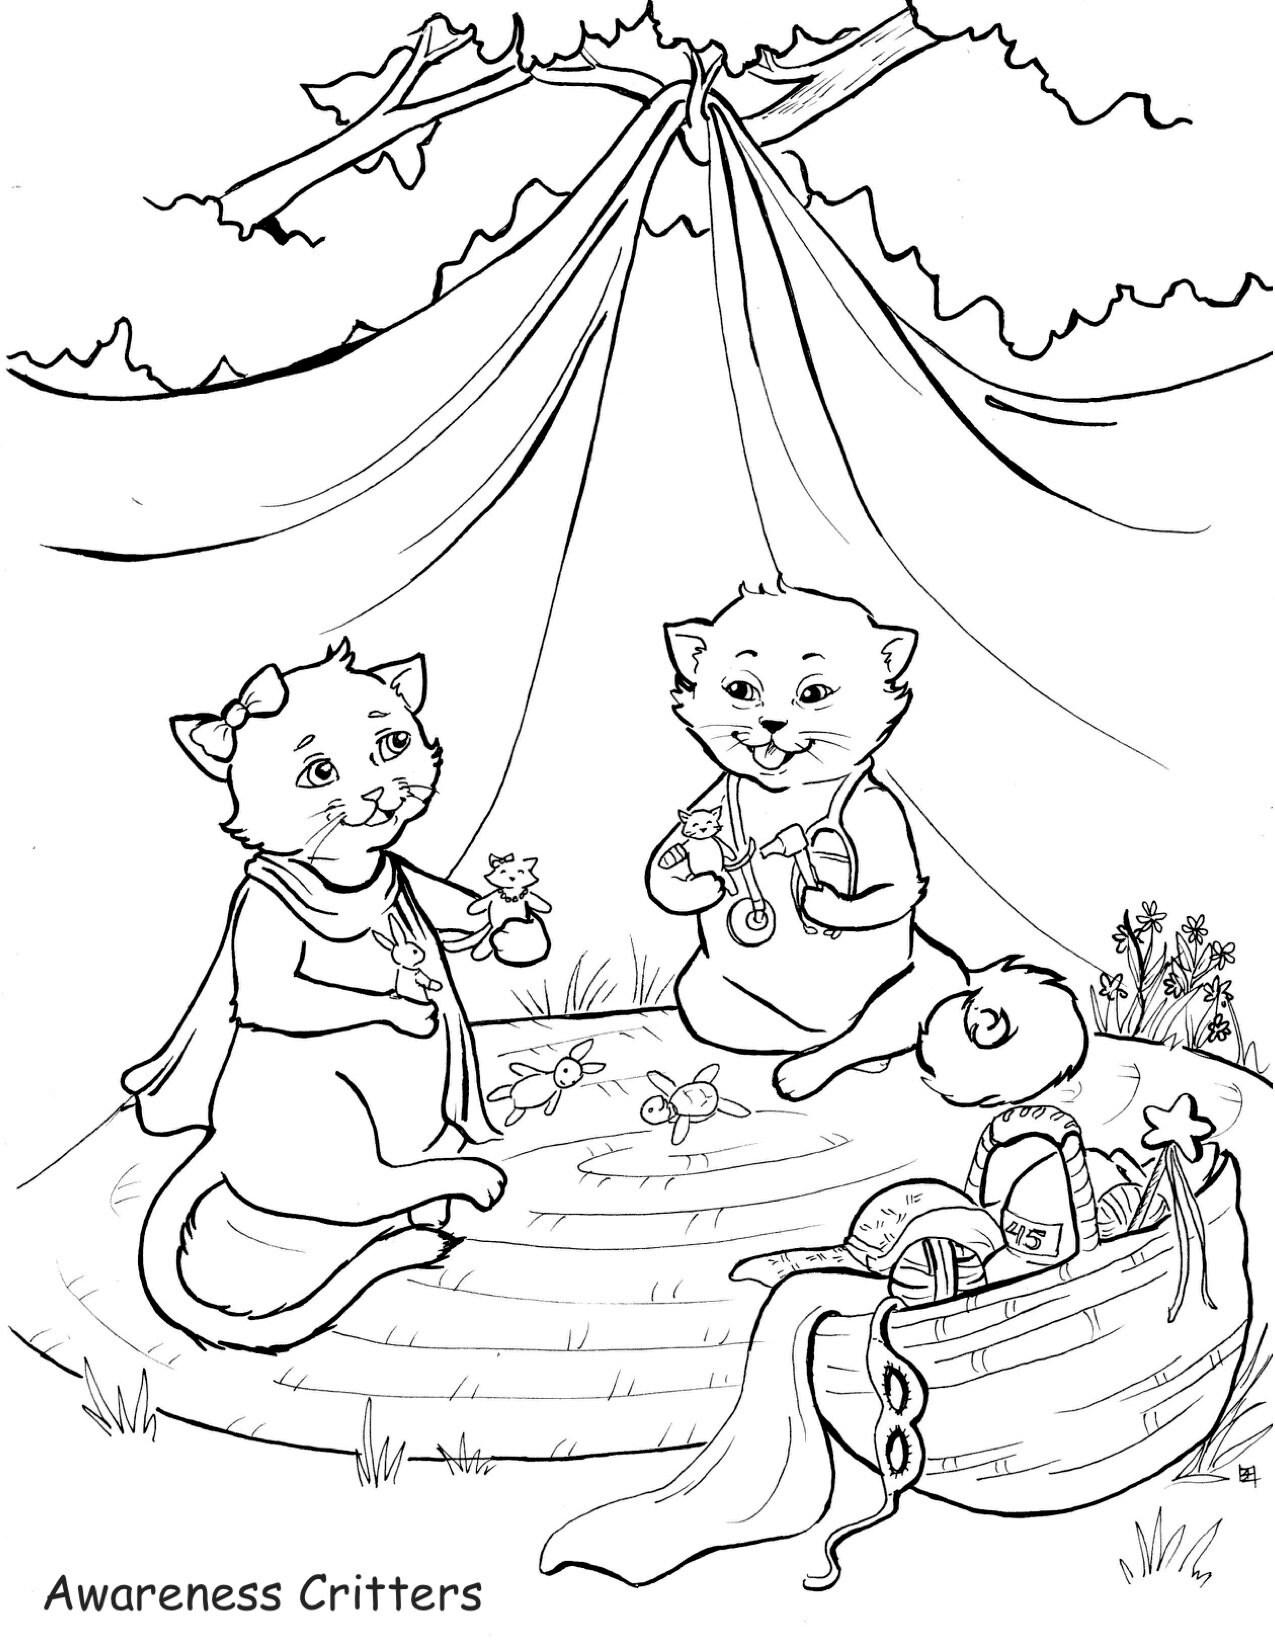 Awareness Critters Down Syndrome Coloring Page - Etsy